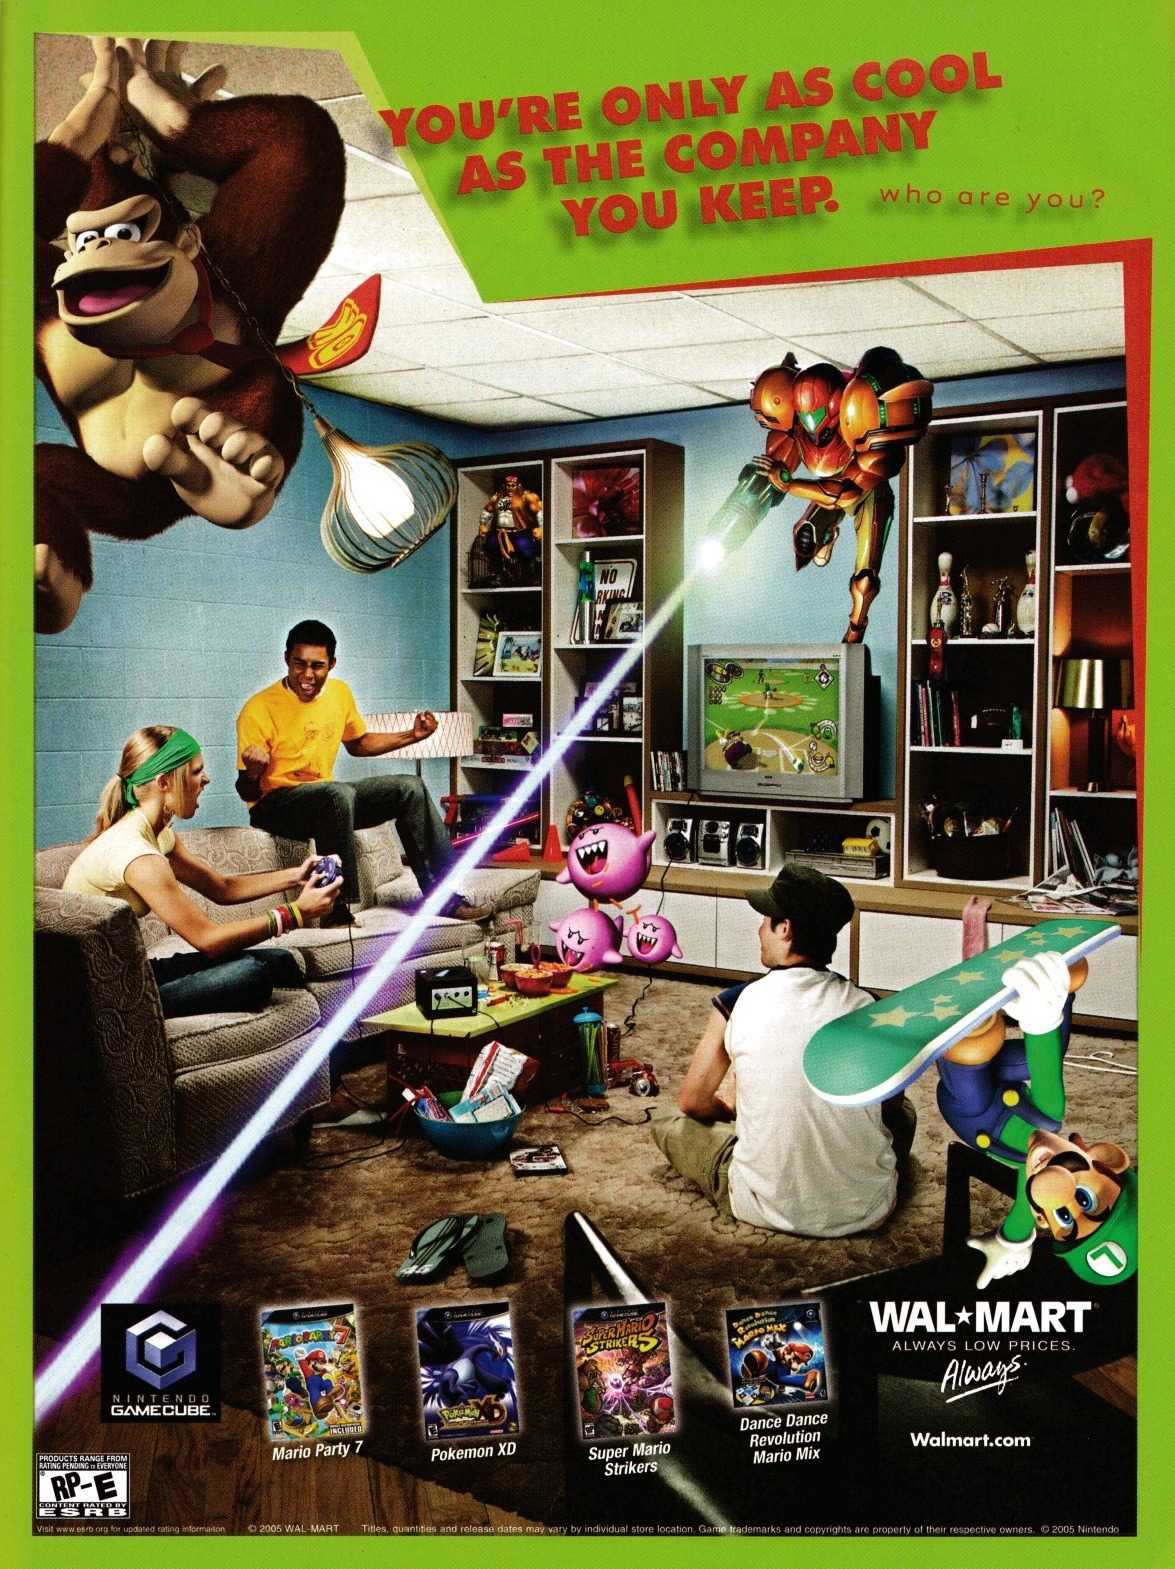 “Walmart - ‘You’re Only As Cool As The Company You Keep’”
• GamePro, December 2005 (#207)
• One of the bazillion endorsement ads for Nintendo products released by retail giant, Wal-Mart. In this one, the awesomness of the Nintendo Gamecube results in...